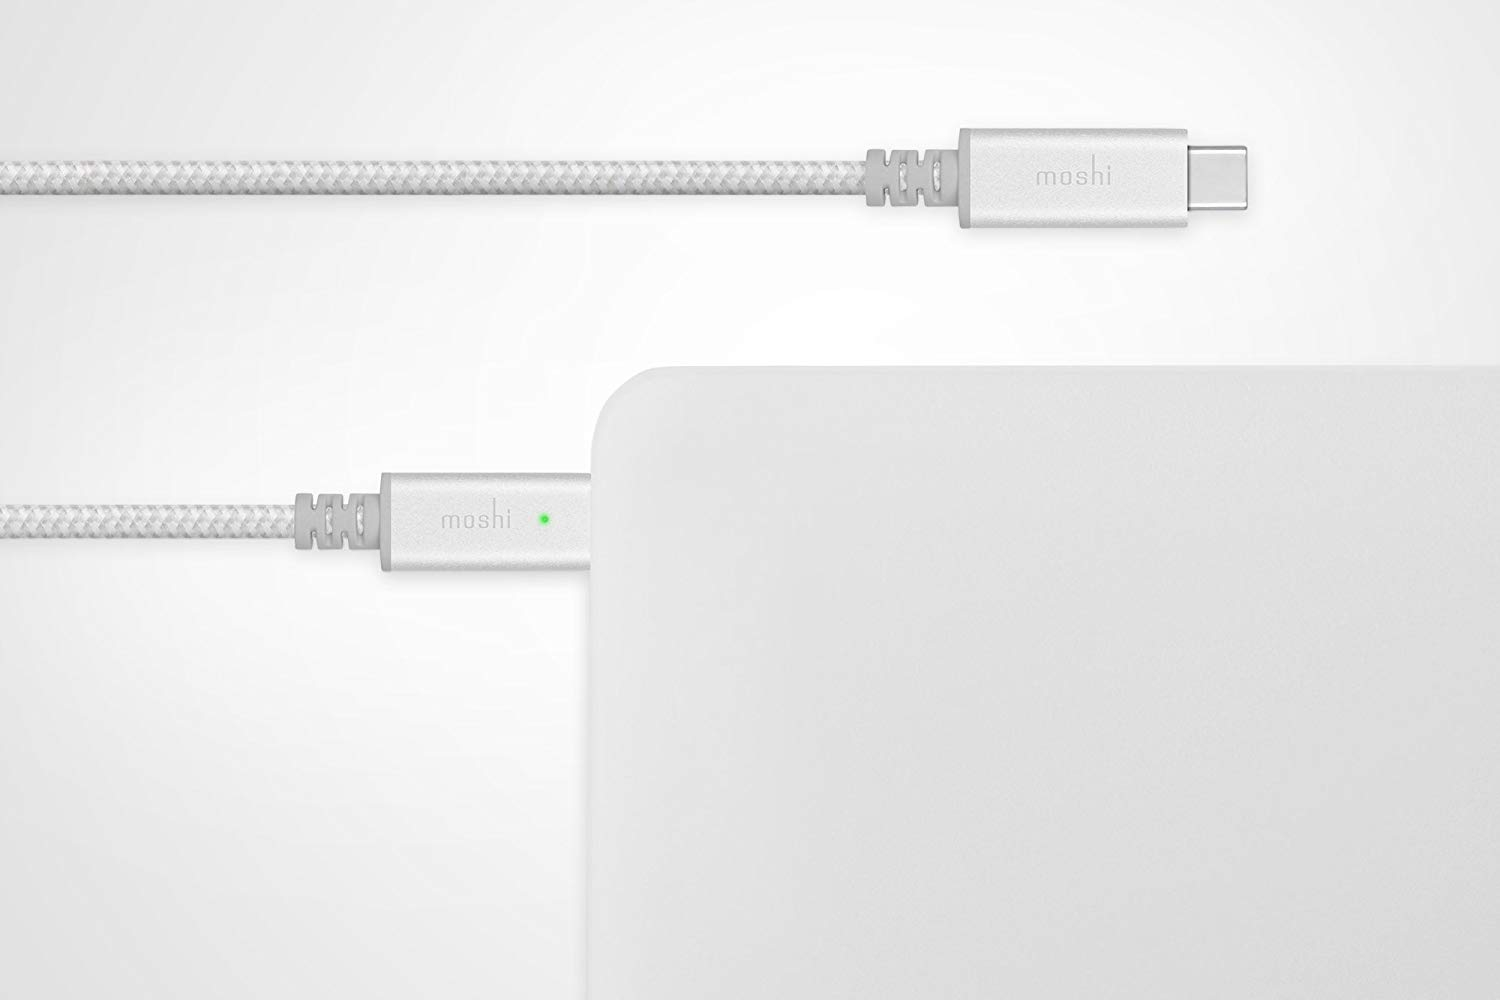 USB Type C Charging Cable for Switch - Hardware - Nintendo